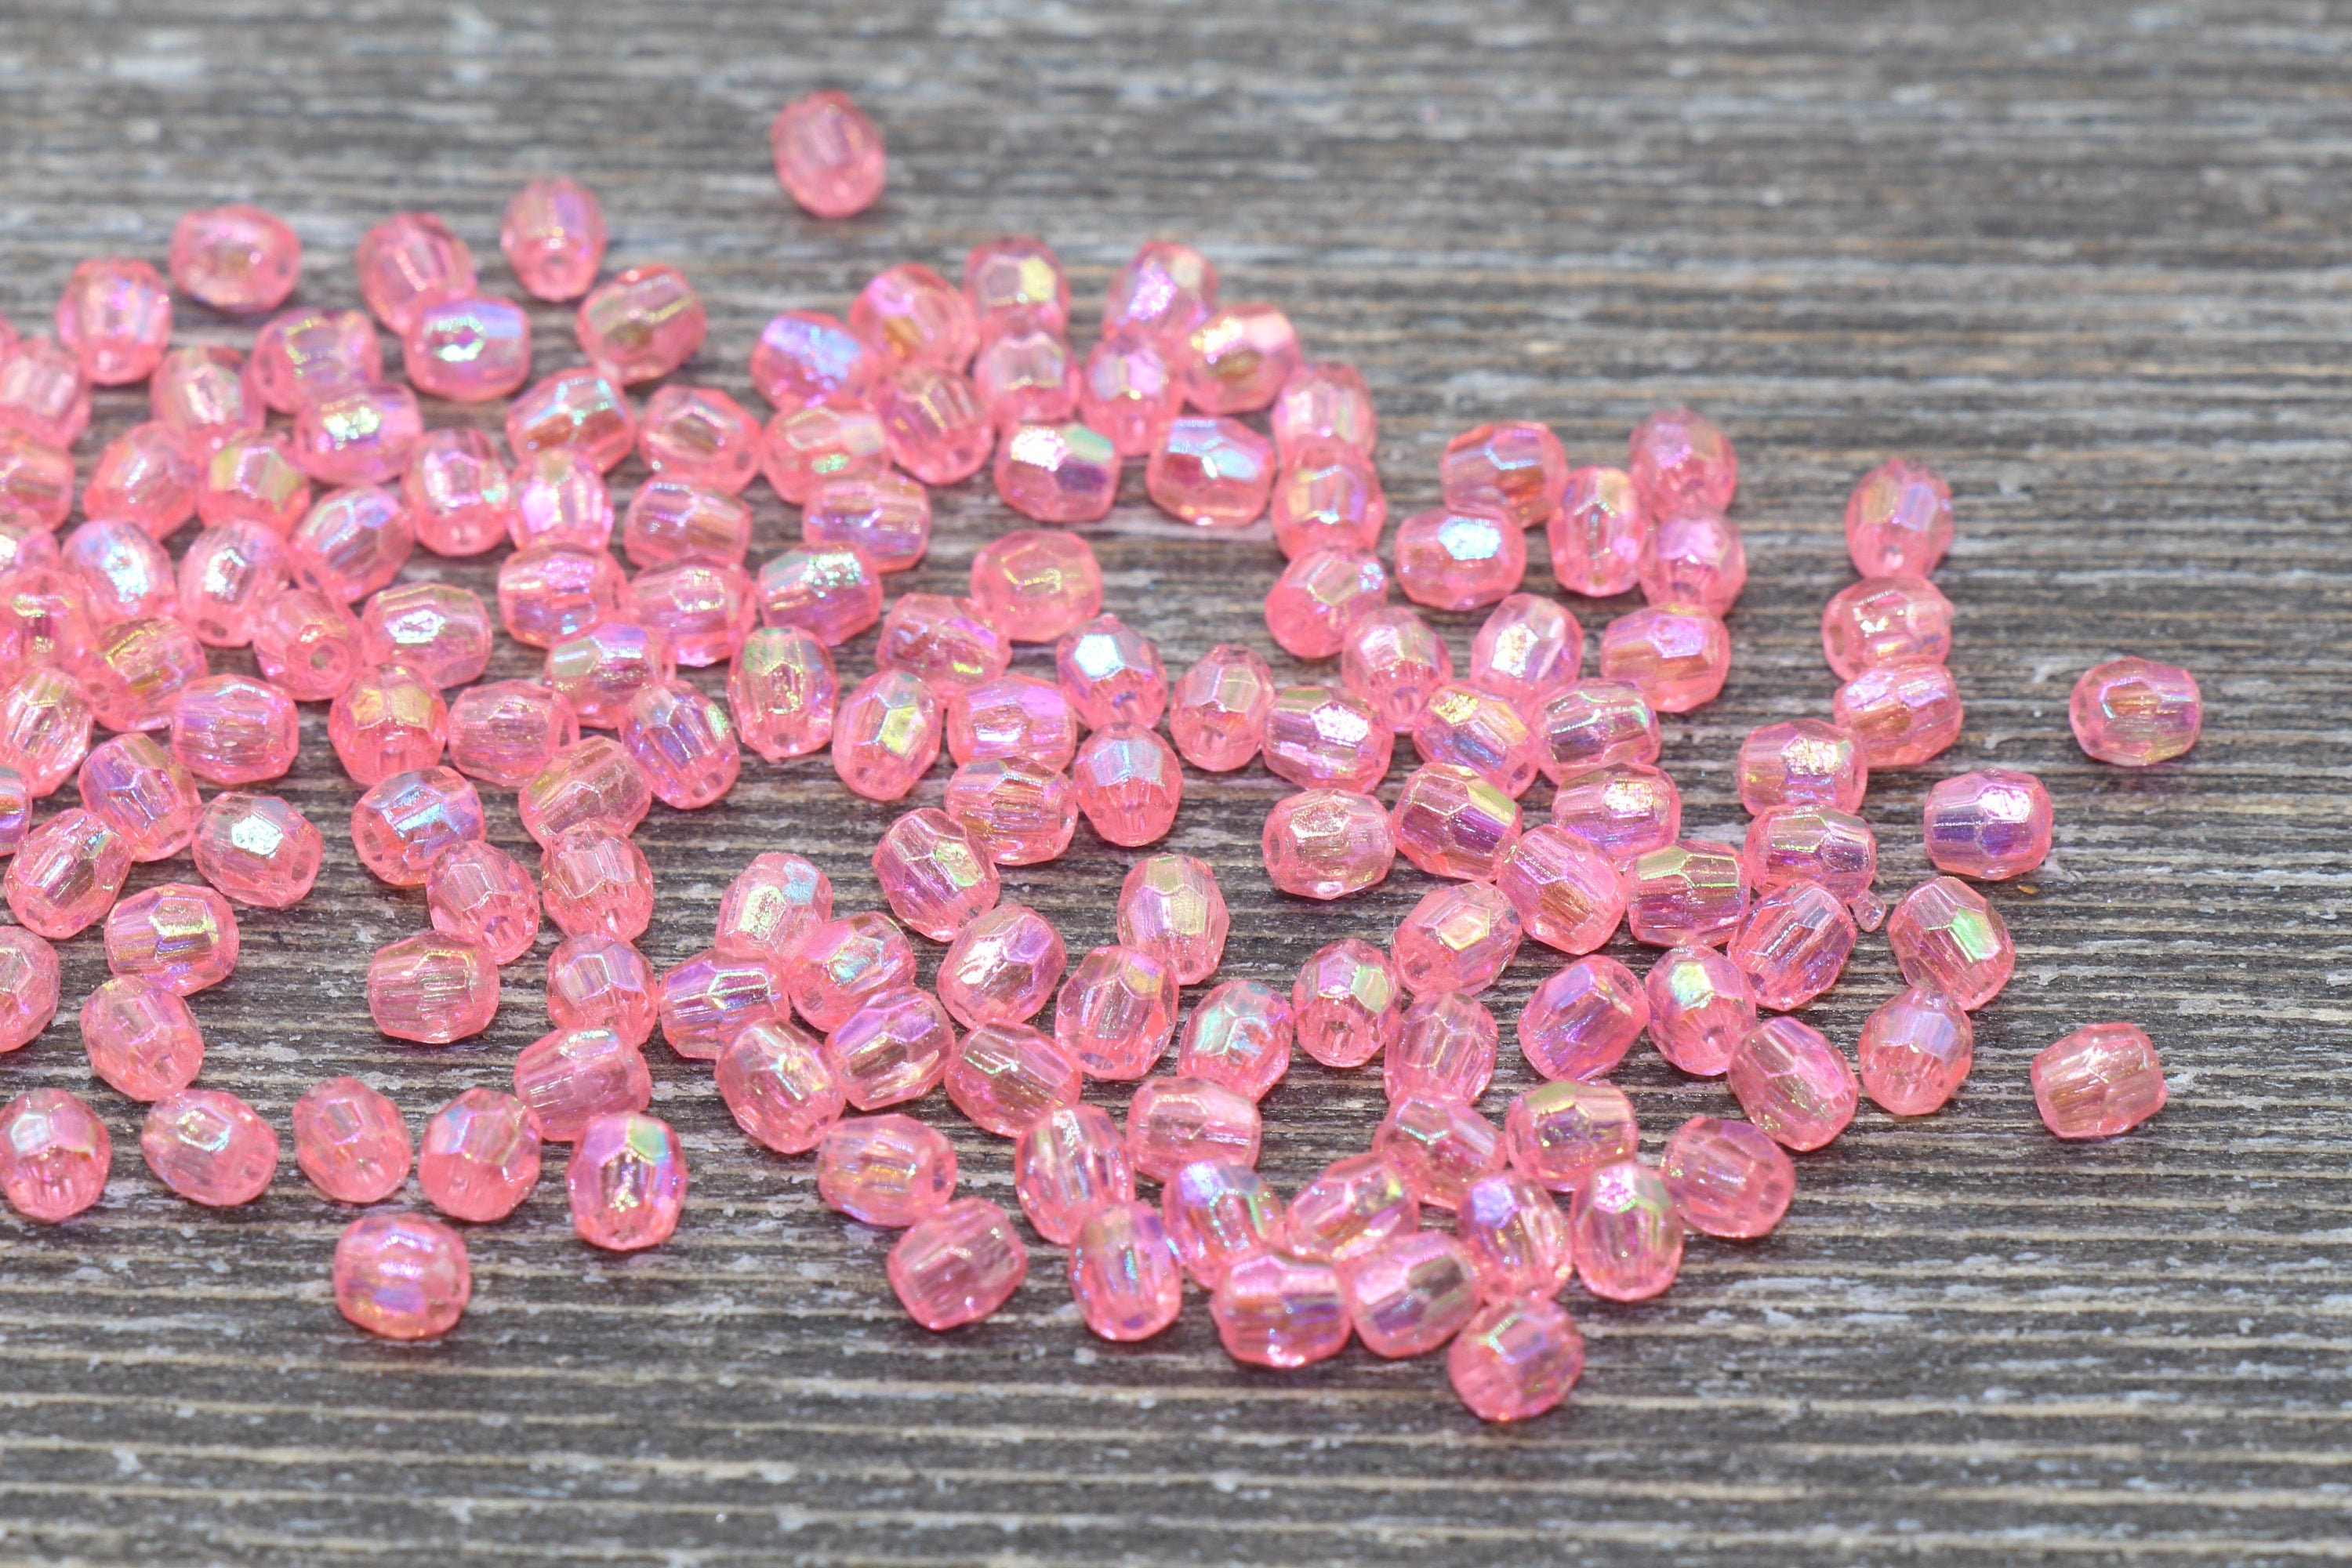 8mm Small AB Bright Mix Translucent Iridescent Acrylic or Resin Beads - 150  pc set